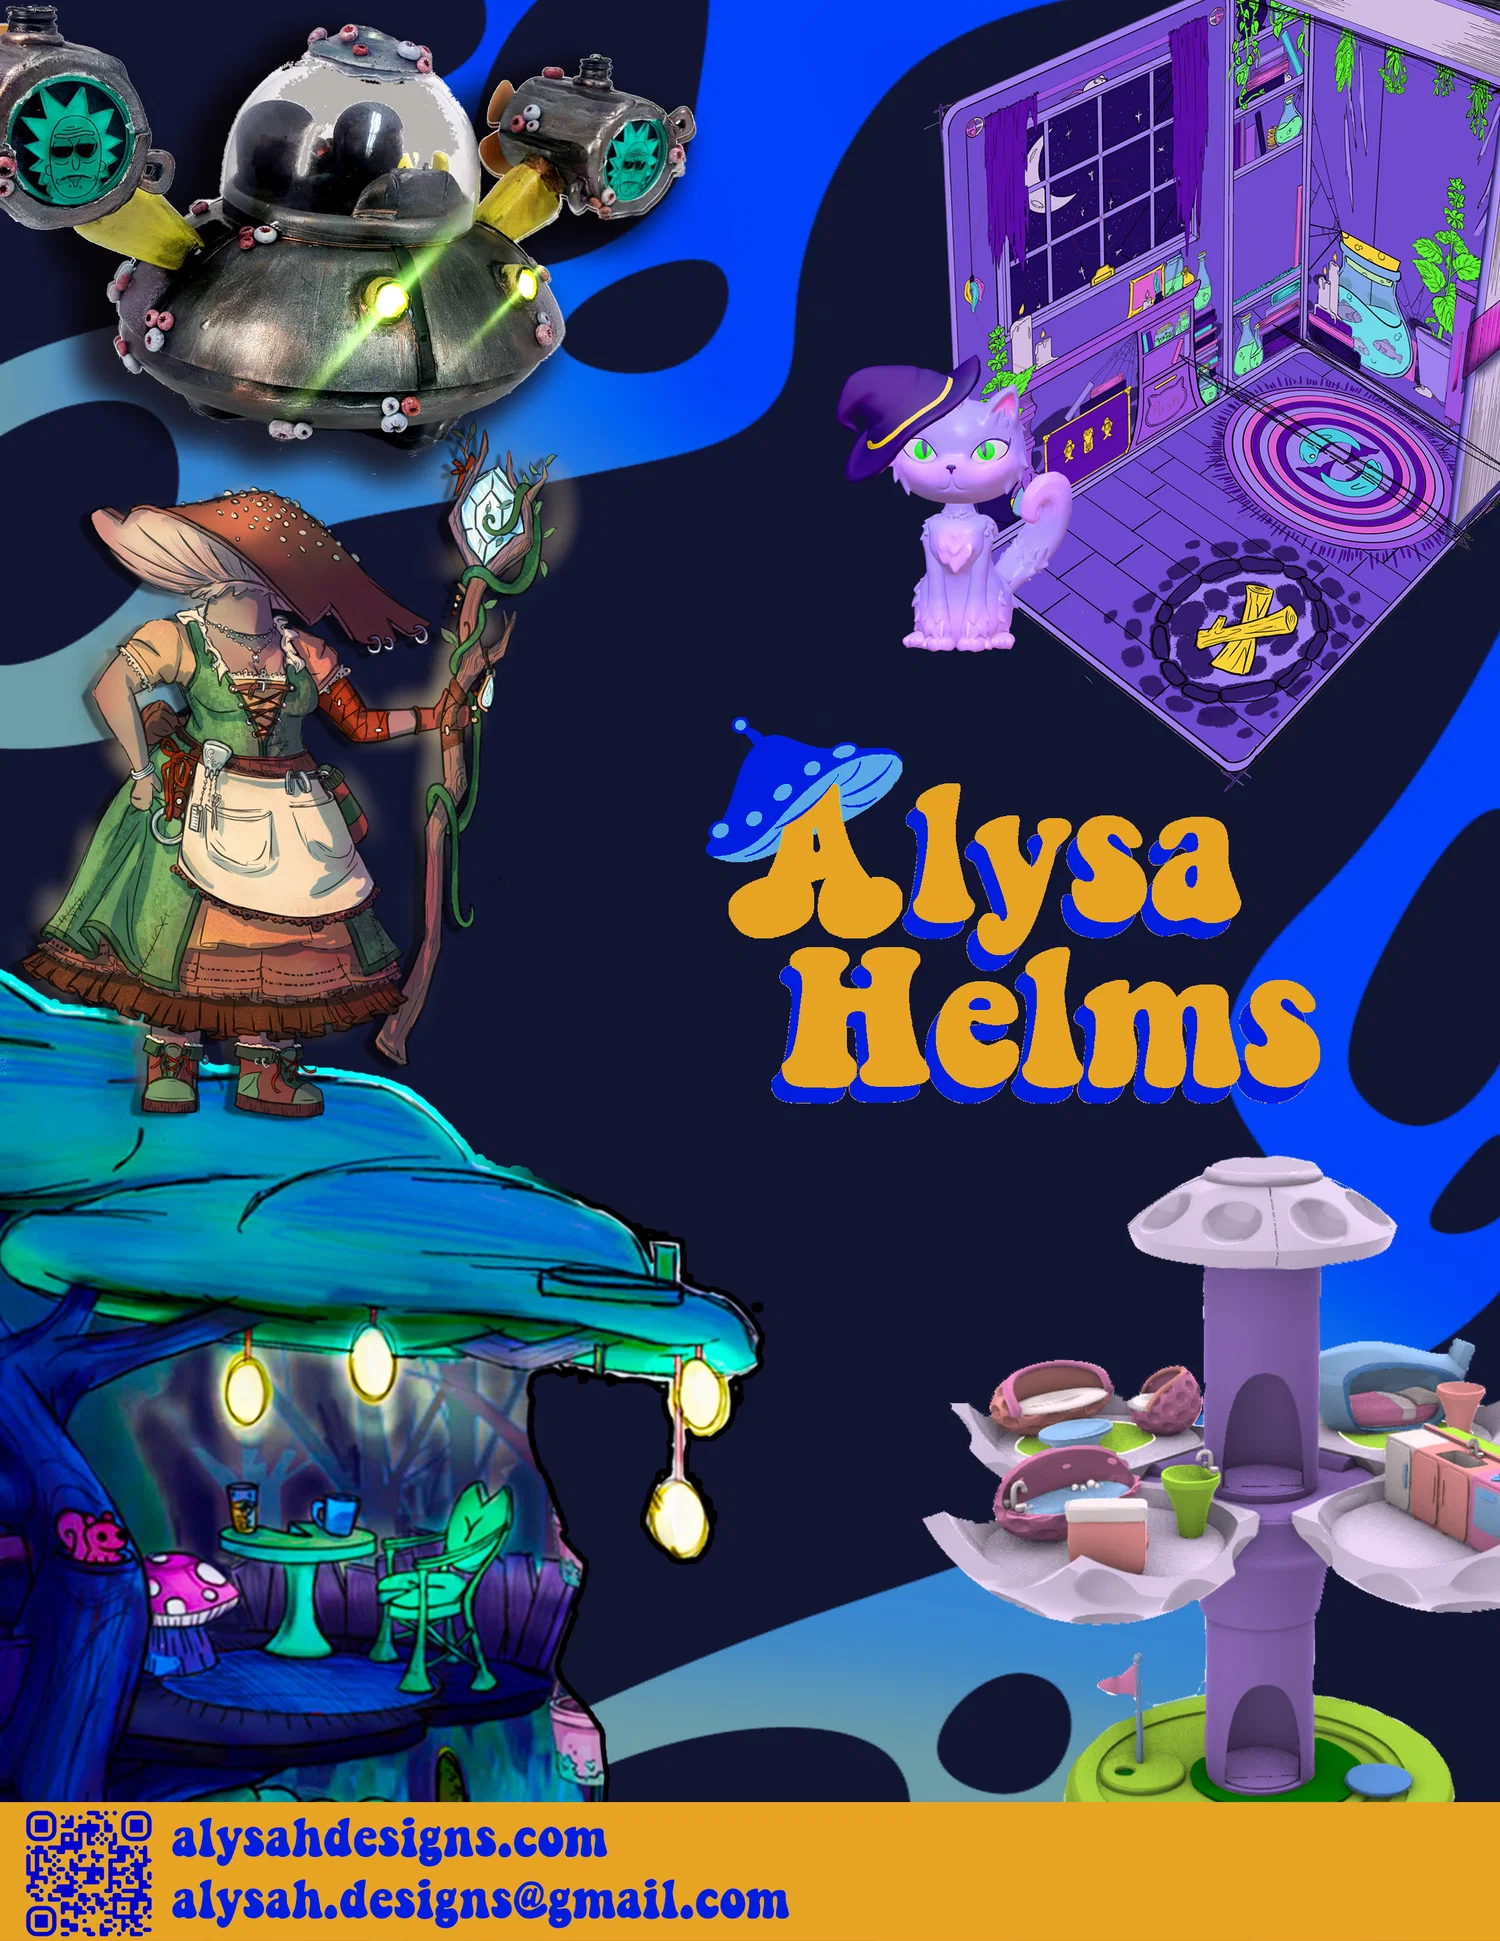 Promo sheet with silver aquatic space ship with orange accents, a mushroom adventure with a staff, tree house playset, purple witch cat playset with 3D model, and 3D gold playset with furniture in purple, white, pink, blue and green 